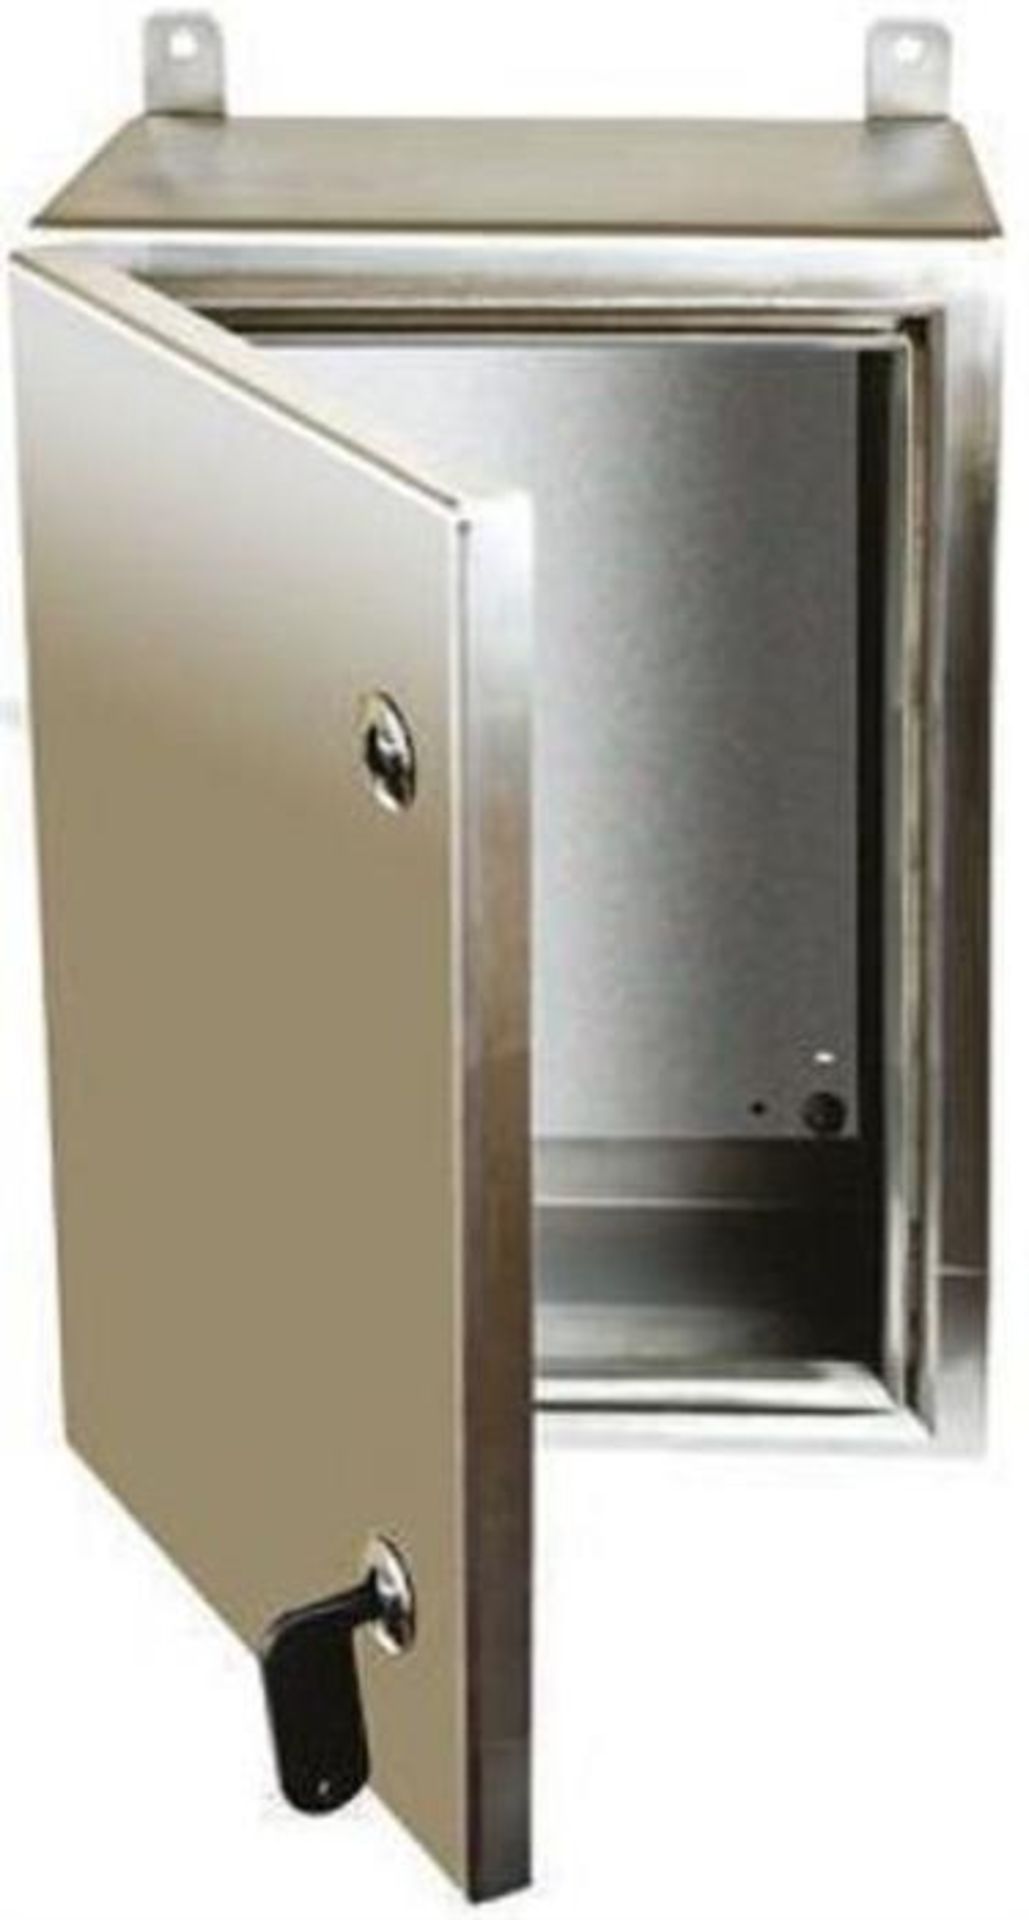 2 x IP69K Stainless Steel Wall Box 600x500x200mm